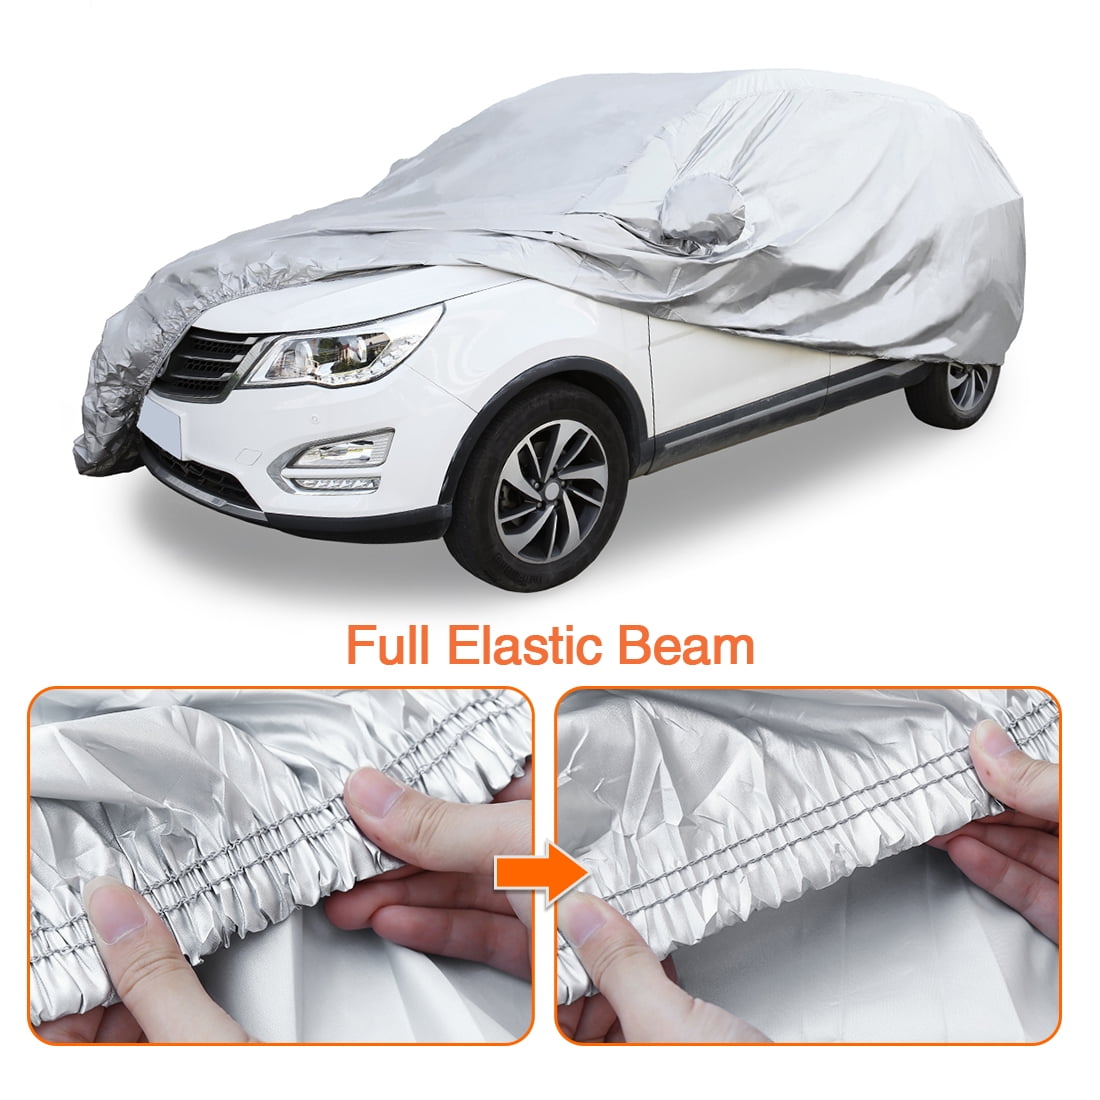 uxcell YL Silver Tone 210D Car Cover Outdoor Weather Waterproof Scratch Rain Snow Heat Resistant W Mirror Pocket 480 x 185 x 170cm 